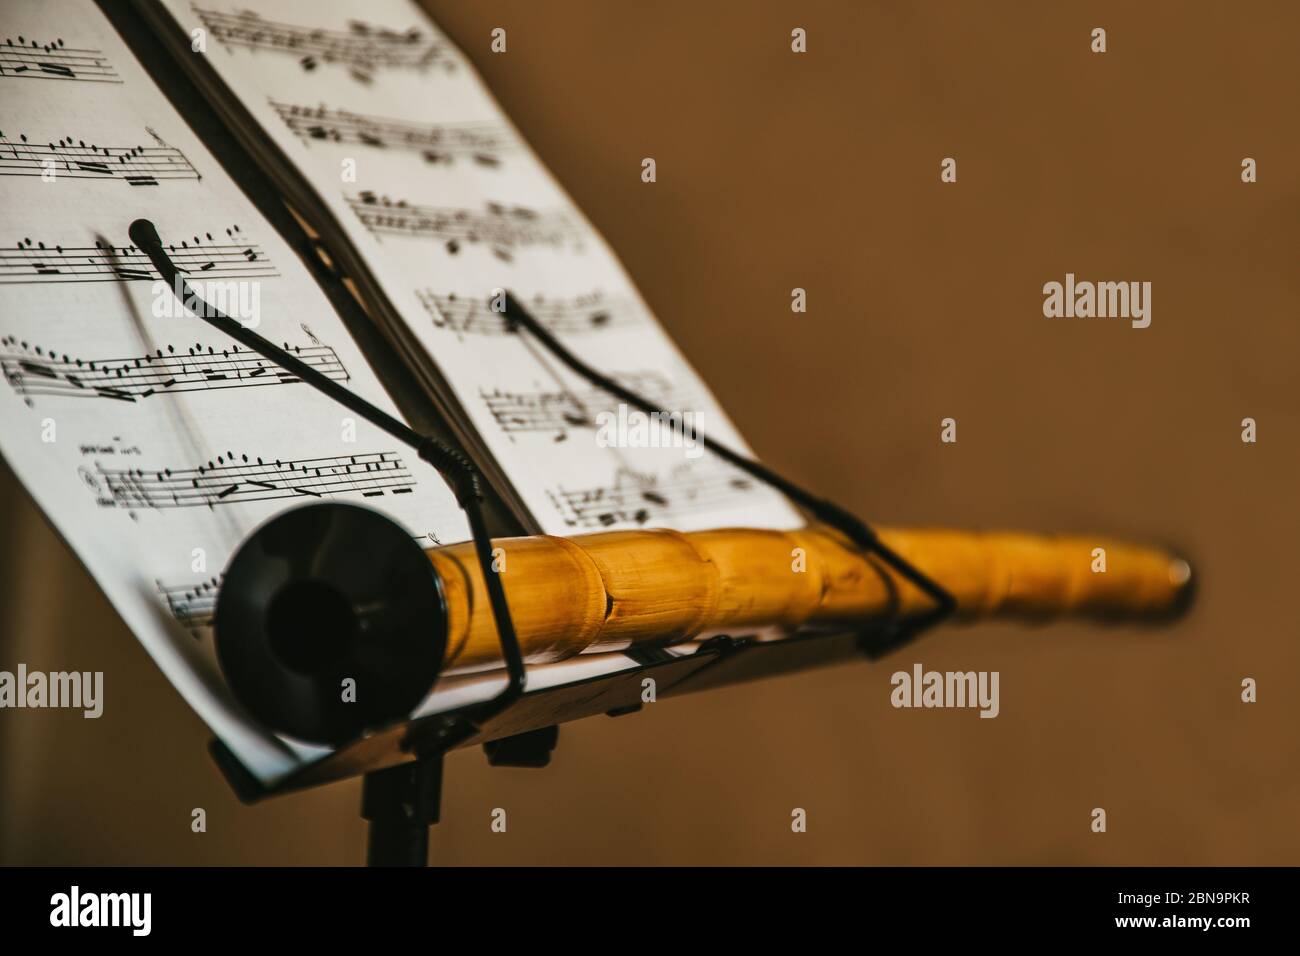 an oriental musical instrument Ney, stays on the music sheet stand with  notes, isolated, mystic scene, traditional turkish music materials, closeup  Stock Photo - Alamy